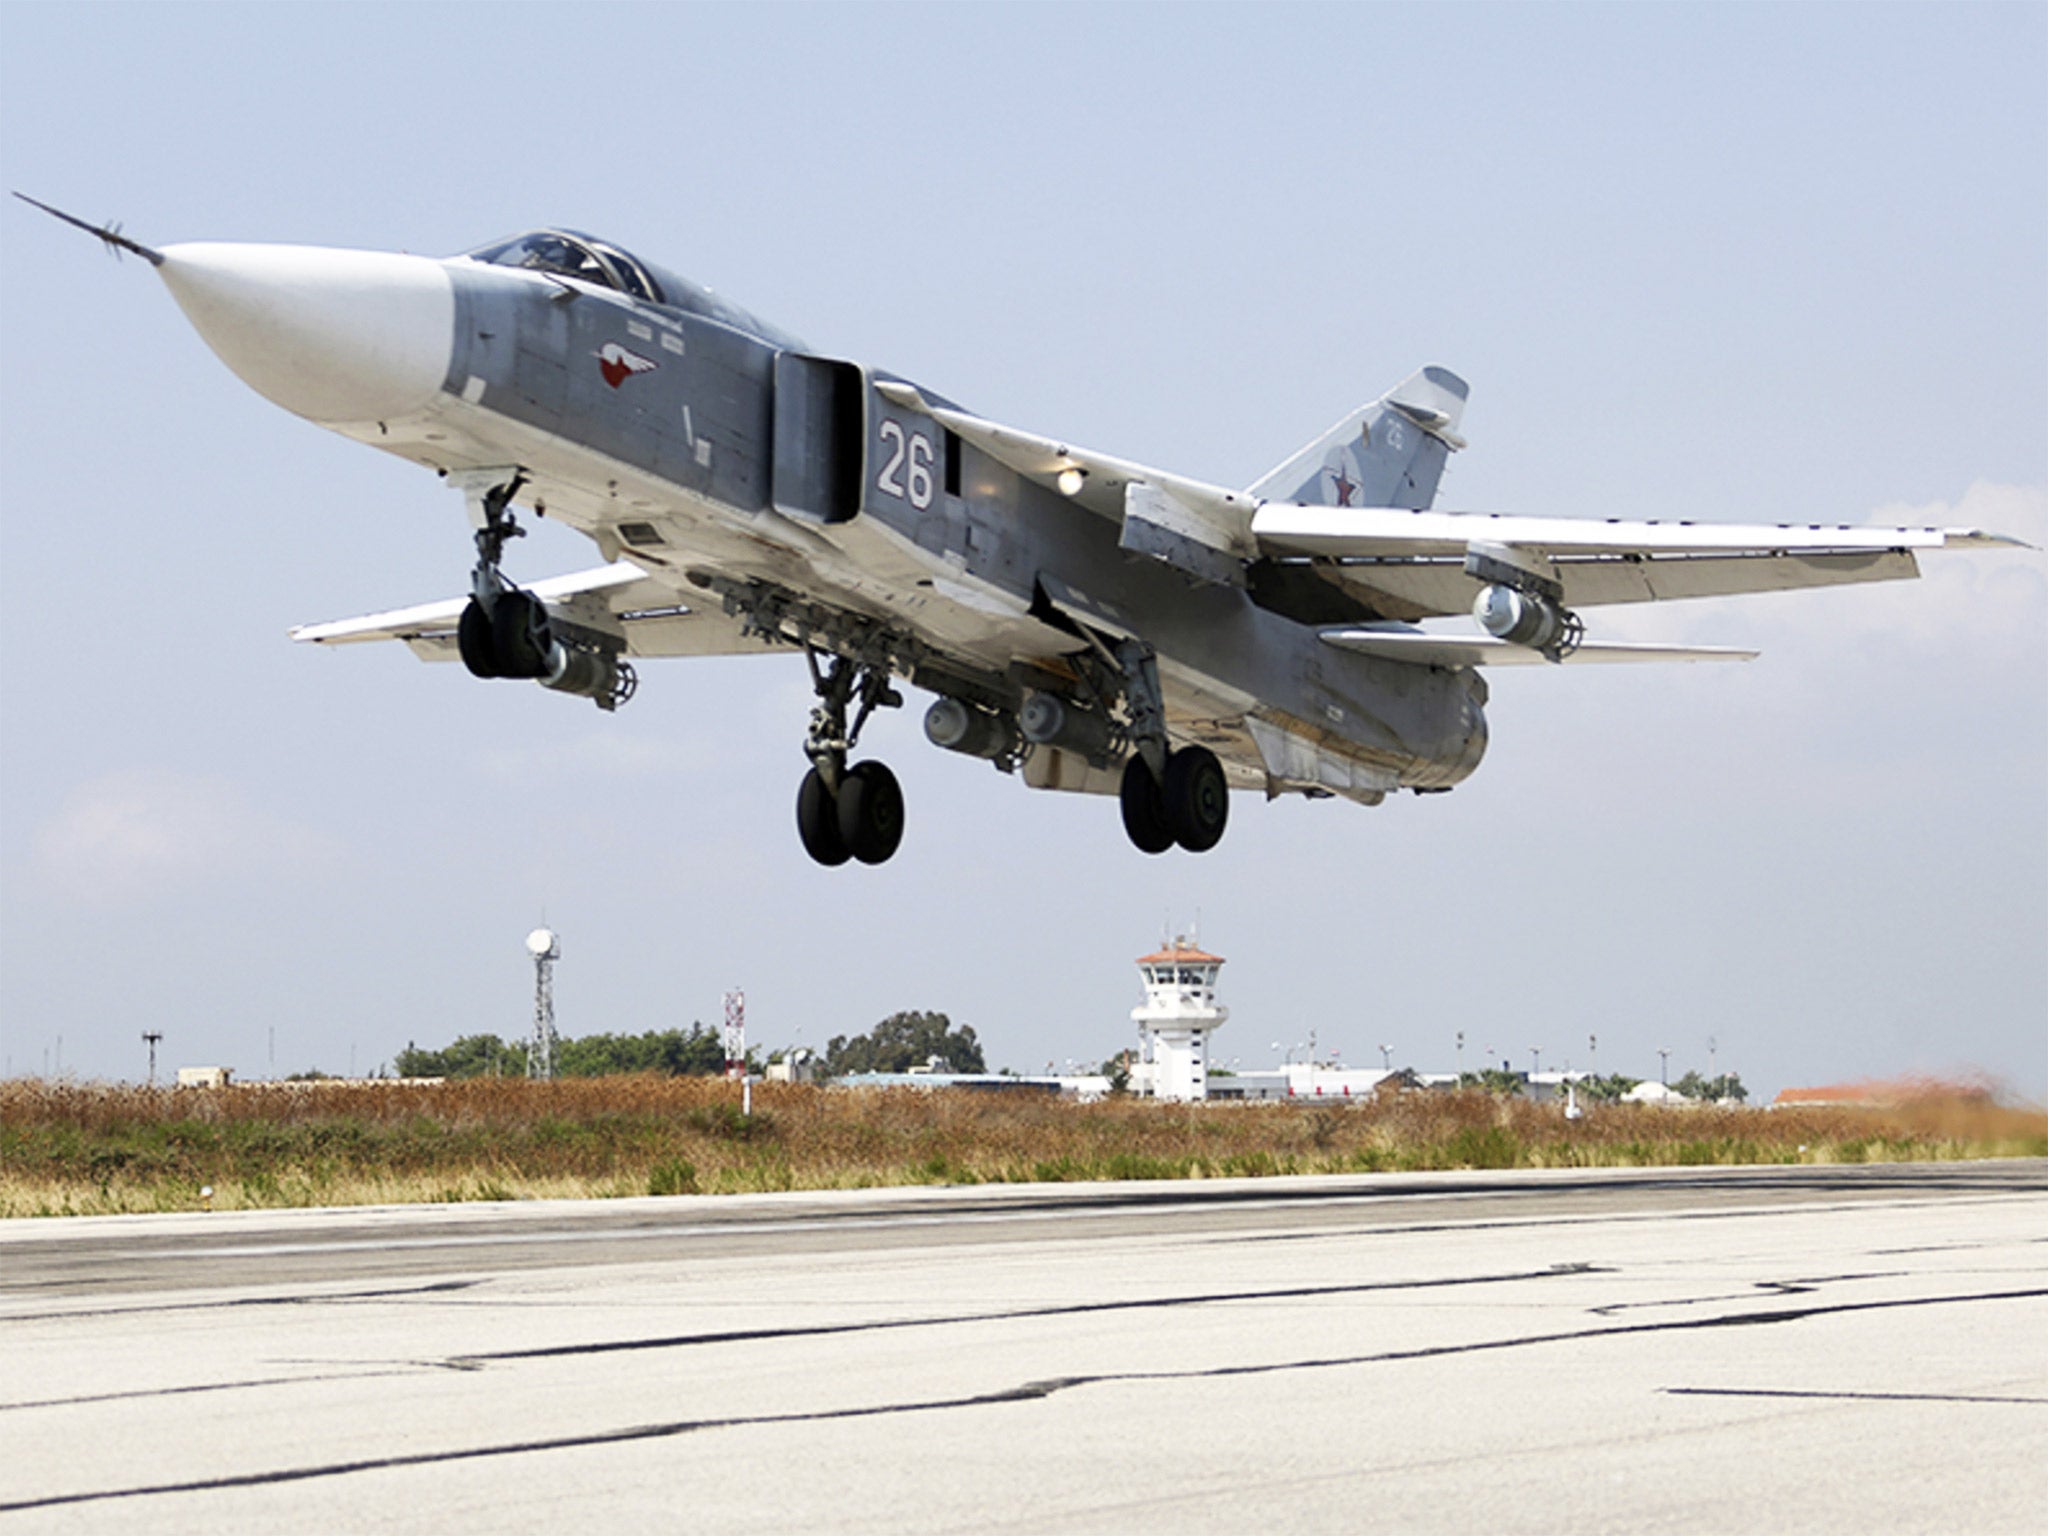 As Russian air stikes in Syria intensify, a SU-24M jet fighter takes off from a Syrian airbase